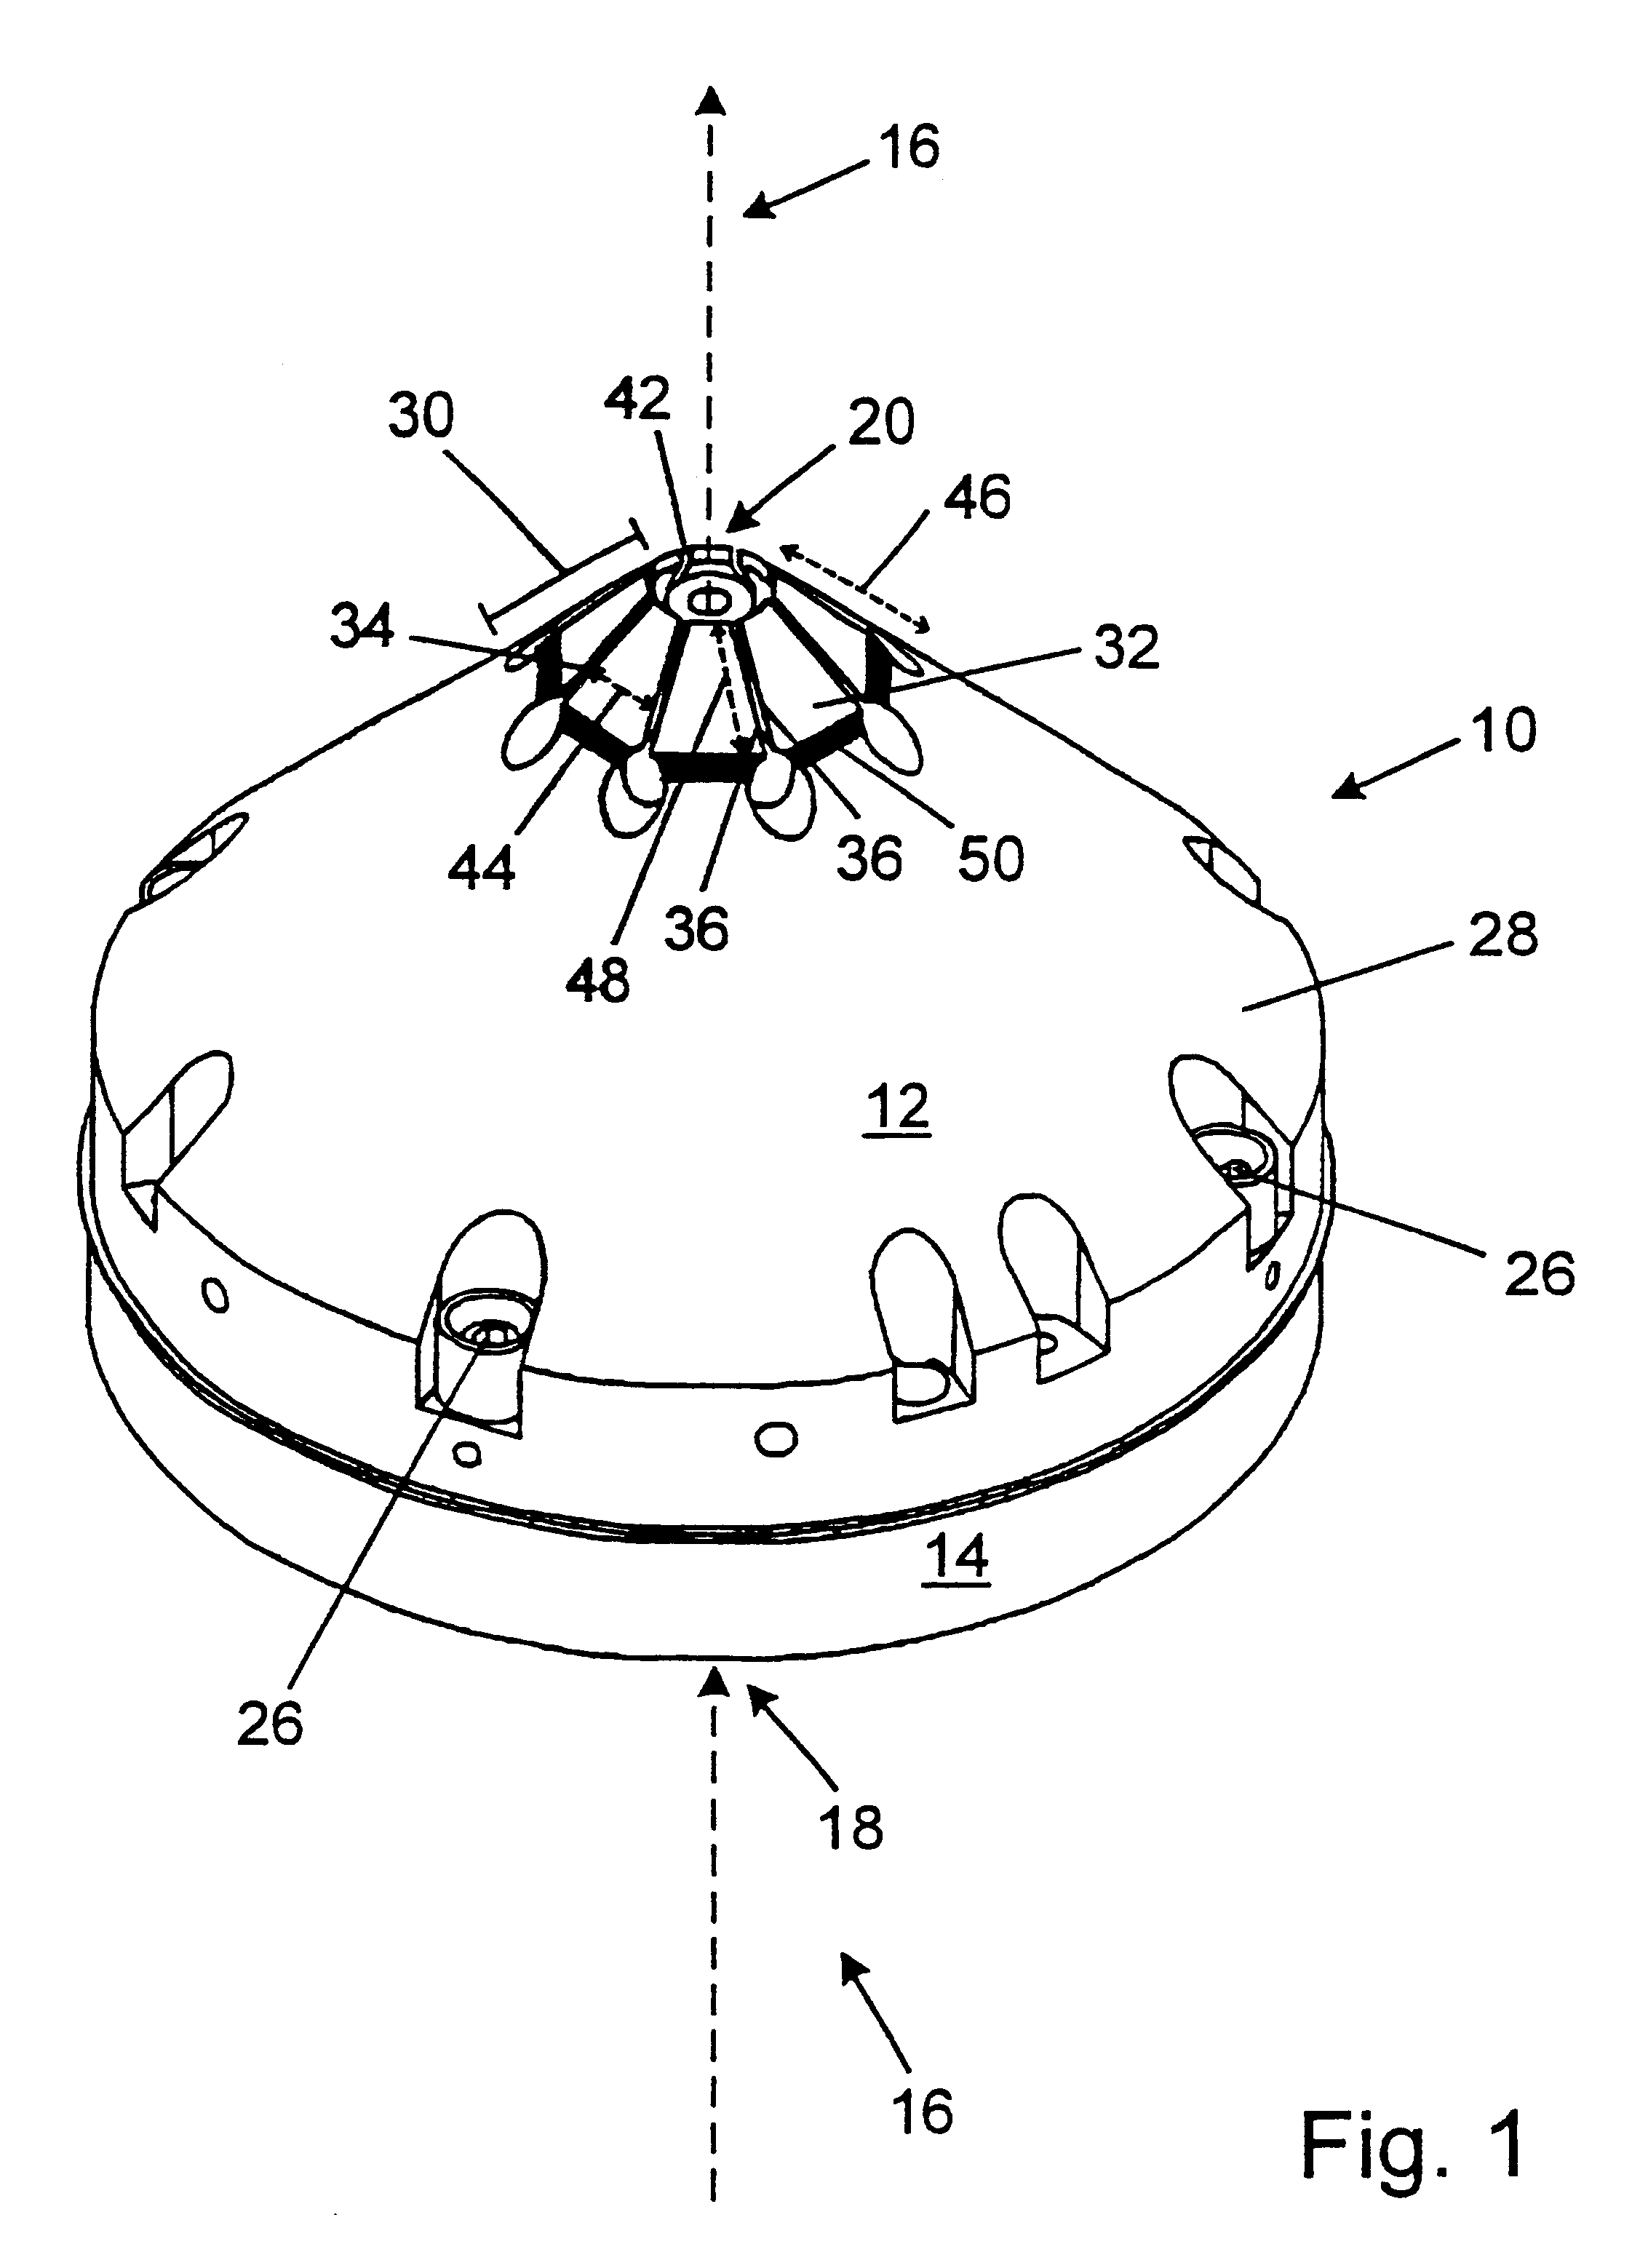 Sectored magnetic lens and method of use